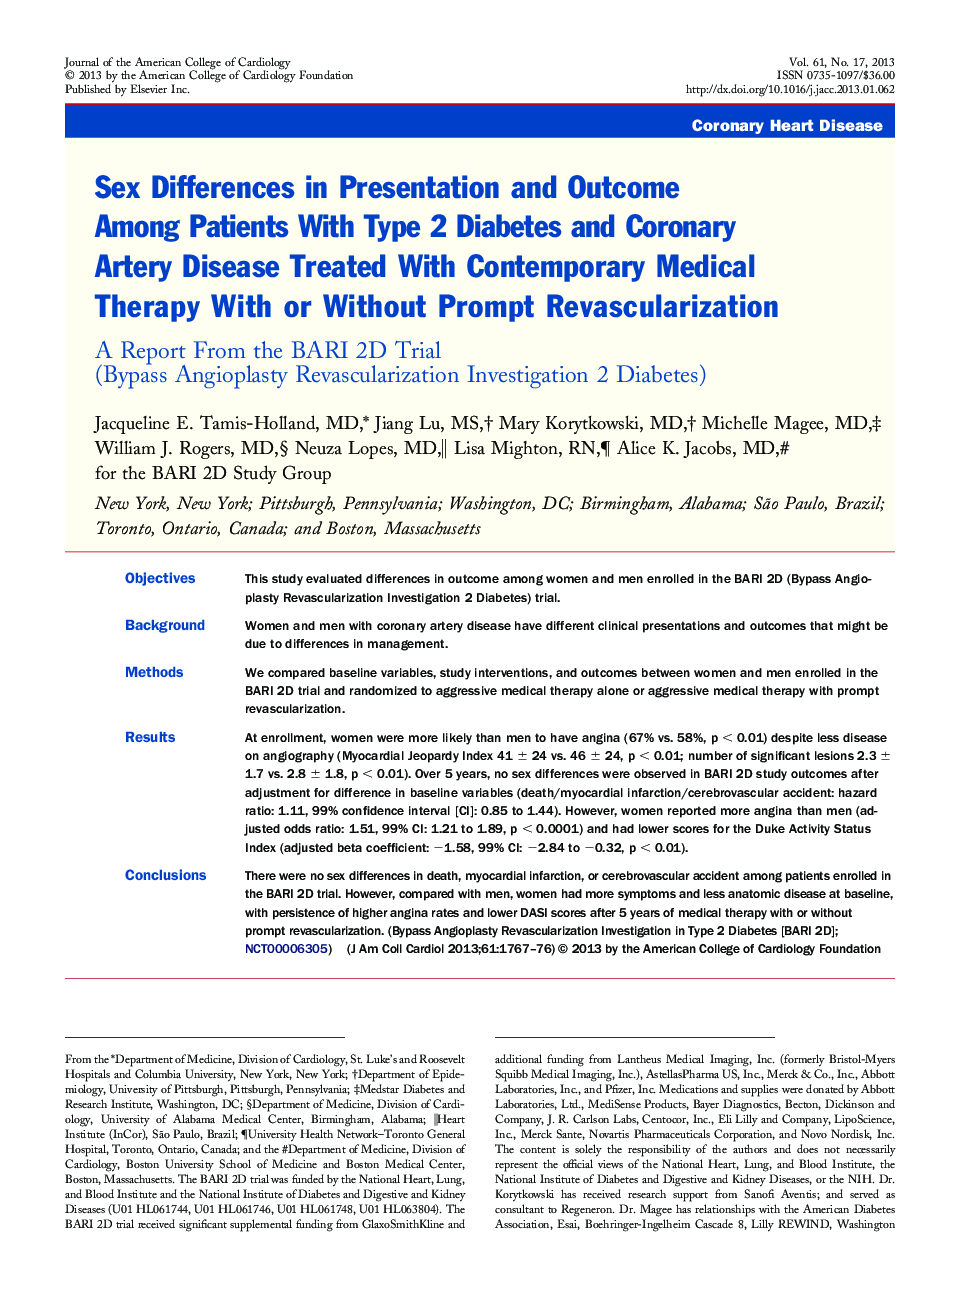 Sex Differences in Presentation and Outcome Among Patients With Type 2 Diabetes and Coronary Artery Disease Treated With Contemporary Medical Therapy With or Without Prompt Revascularization: A Report From the BARI 2D Trial (Bypass Angioplasty Revasculari